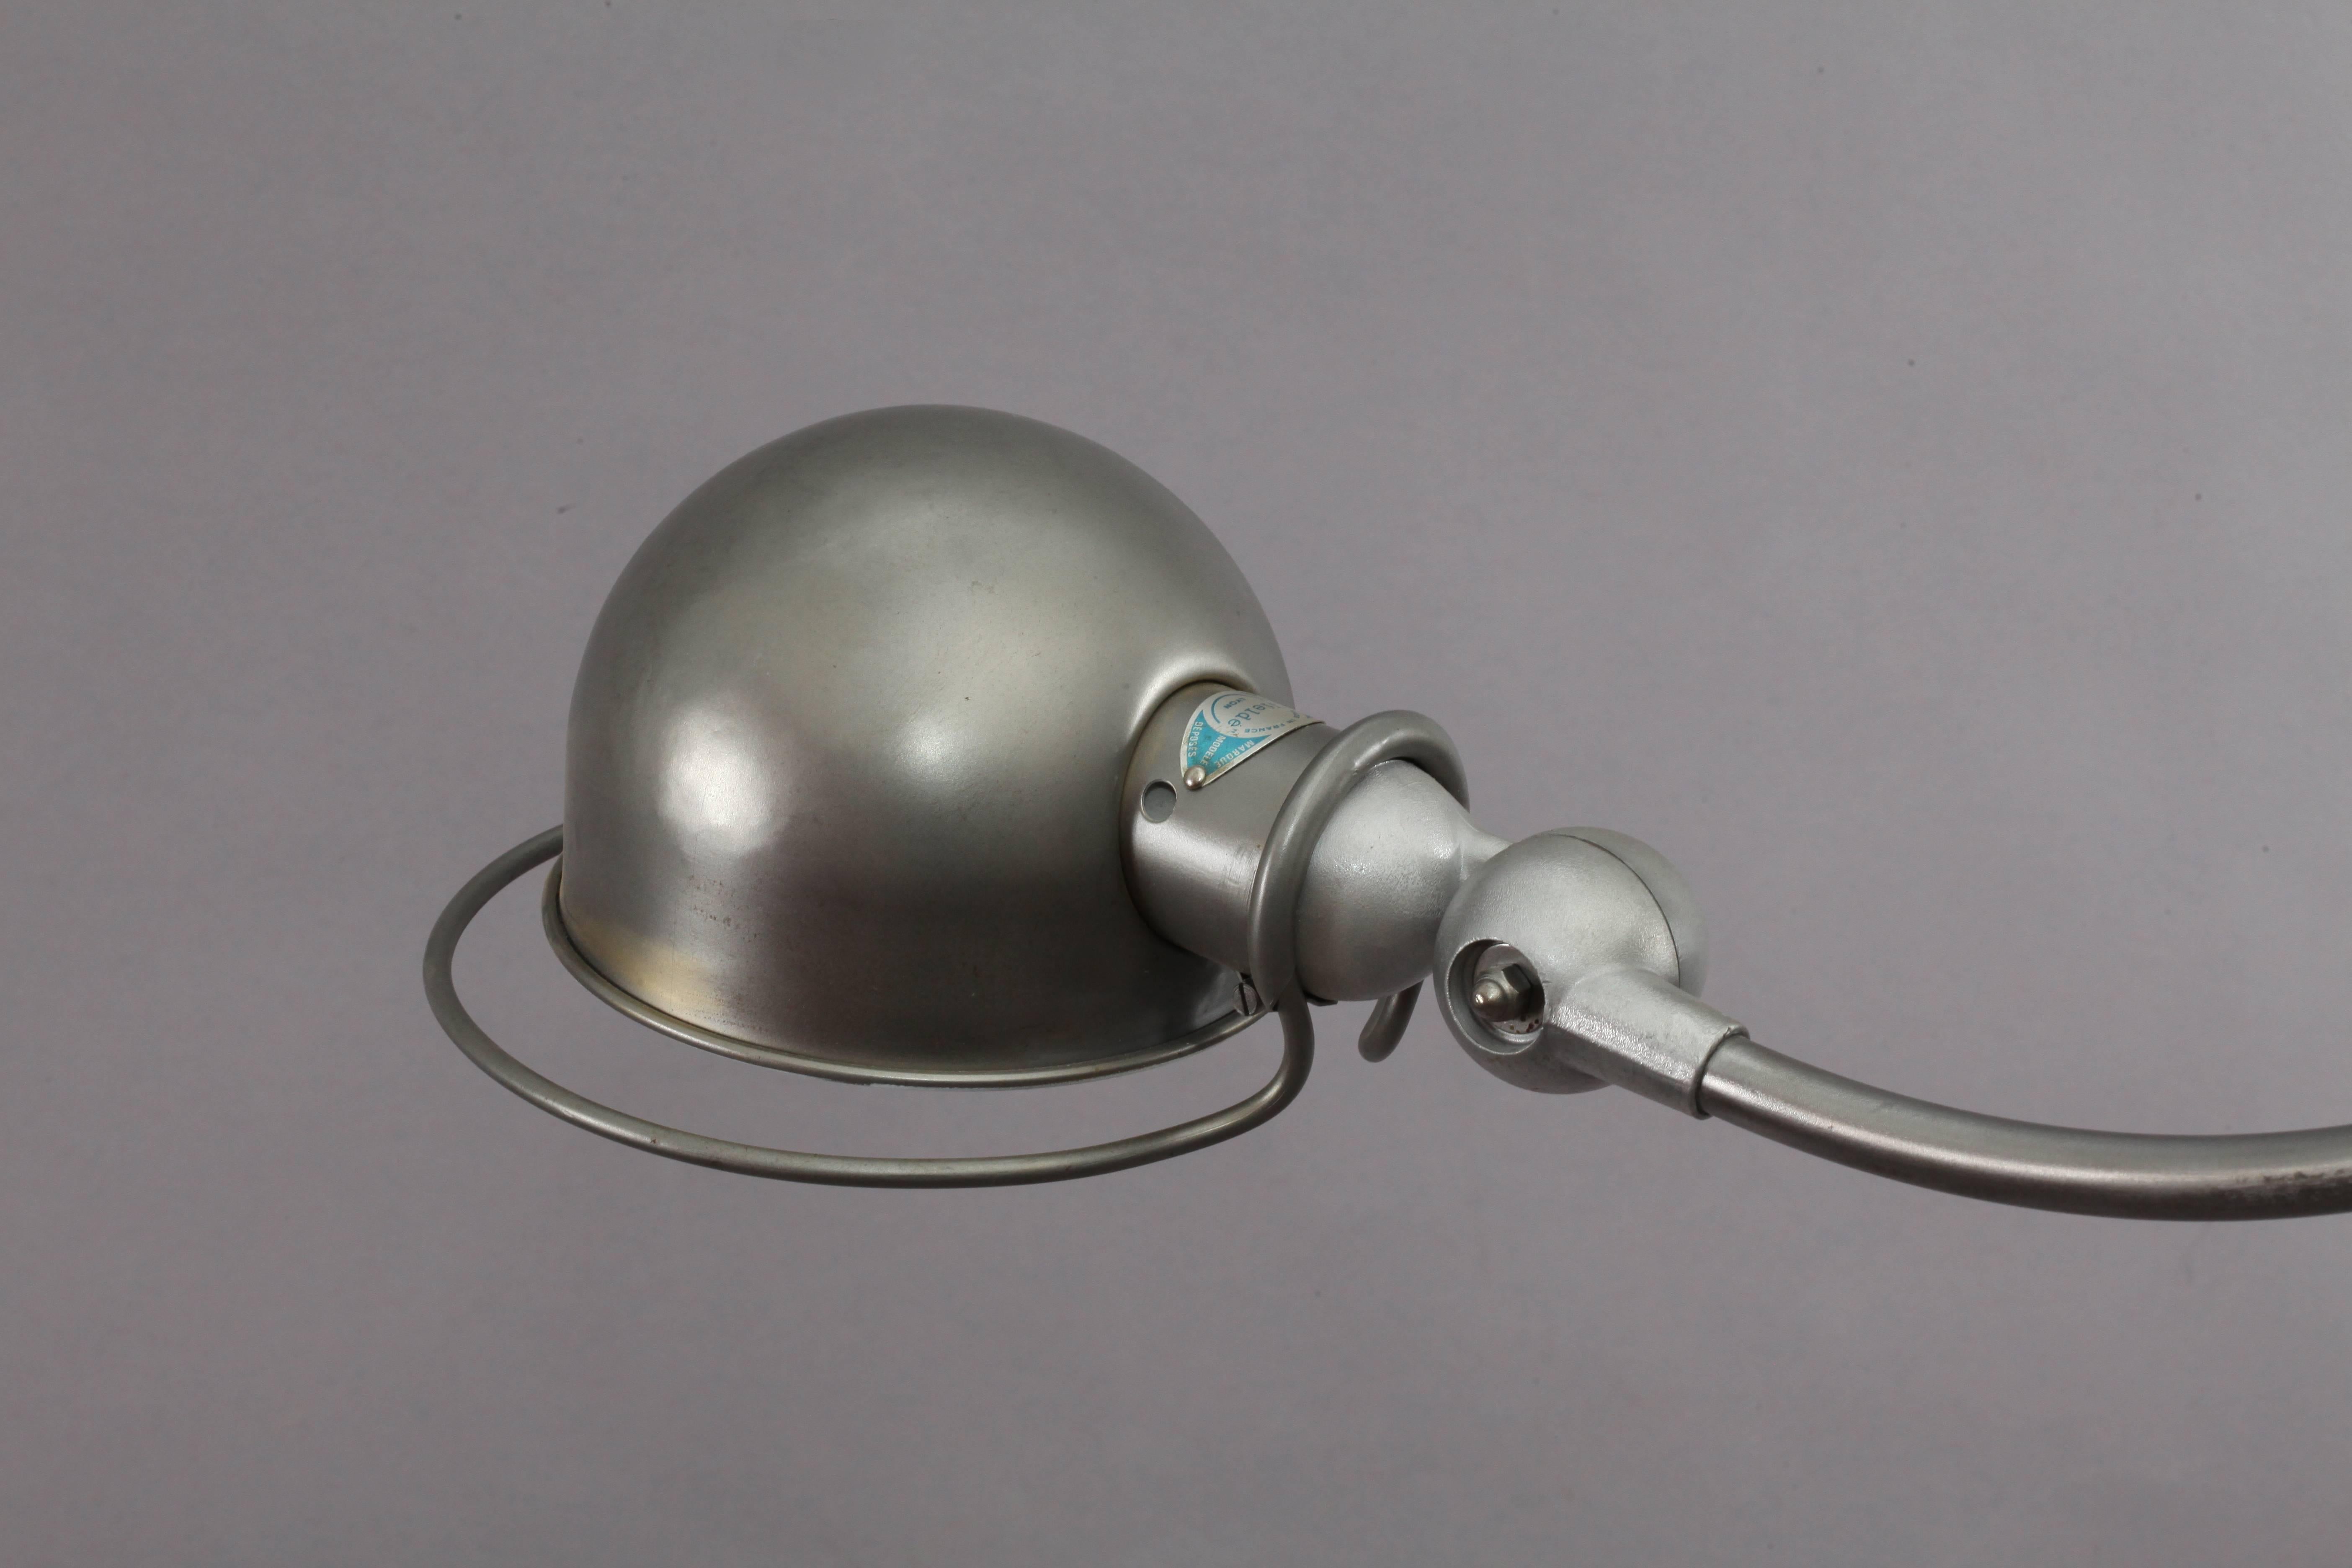 Industrial design,
Factory ceiling flush mount
designed Jean Louis Domecq,
manufacture Jielde Lyon.
France, 1950.
Three adjustable arms and shades,
measures: height adjustable 20-60cm
polished steel.